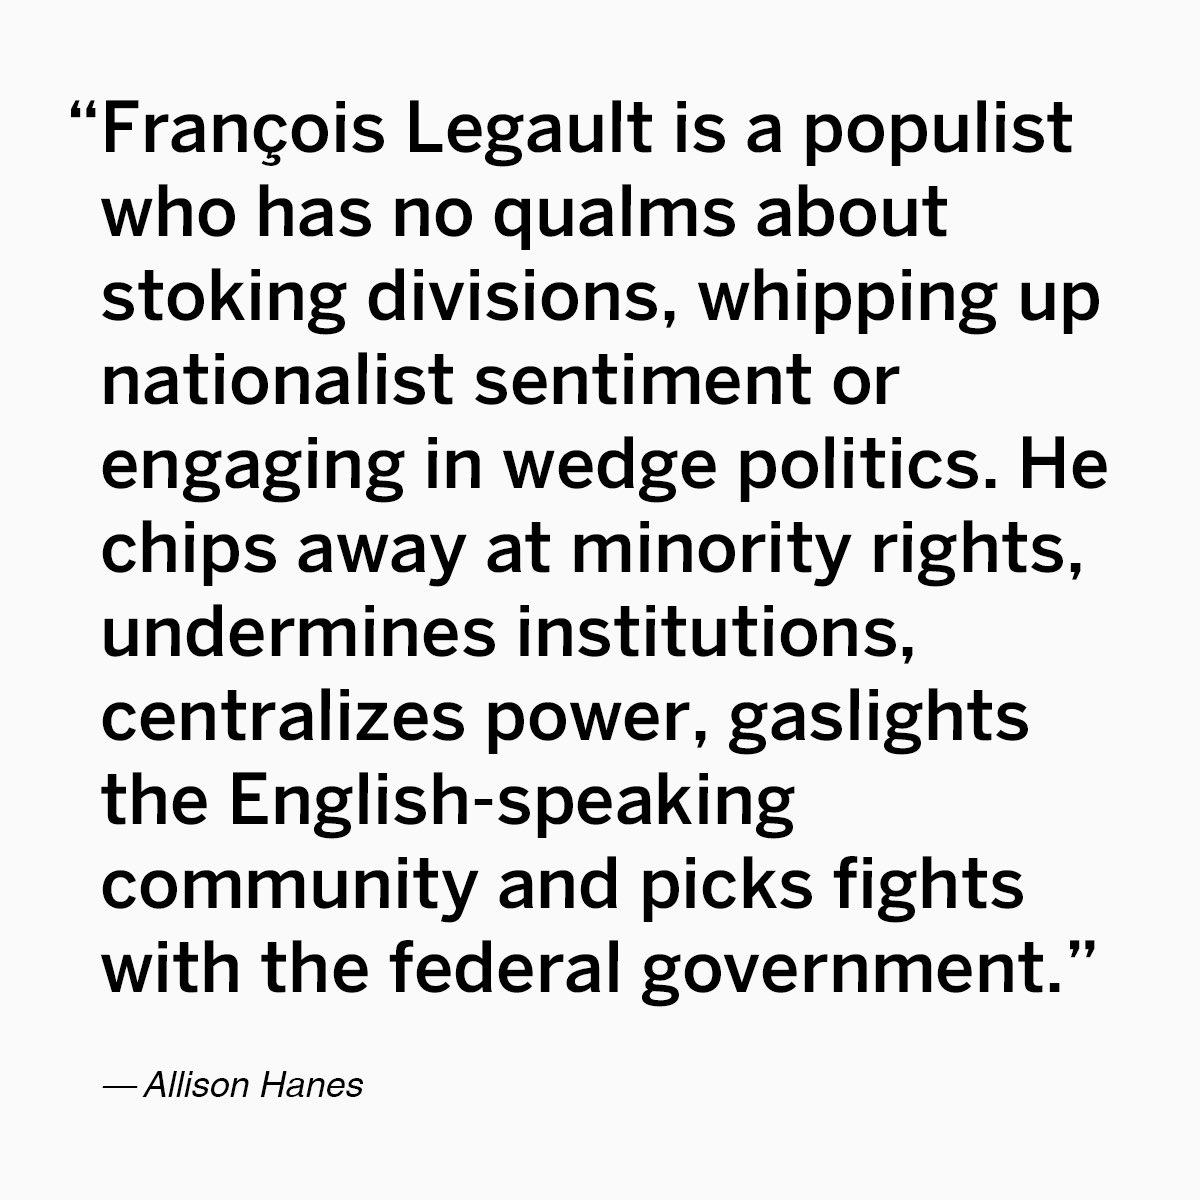 When things aren't going well for his government, François Legault has a nasty habit of targeting the English-speaking community. The next few years could be rough, Allison Hanes writes montrealgazette.com/opinion/column… #polQC